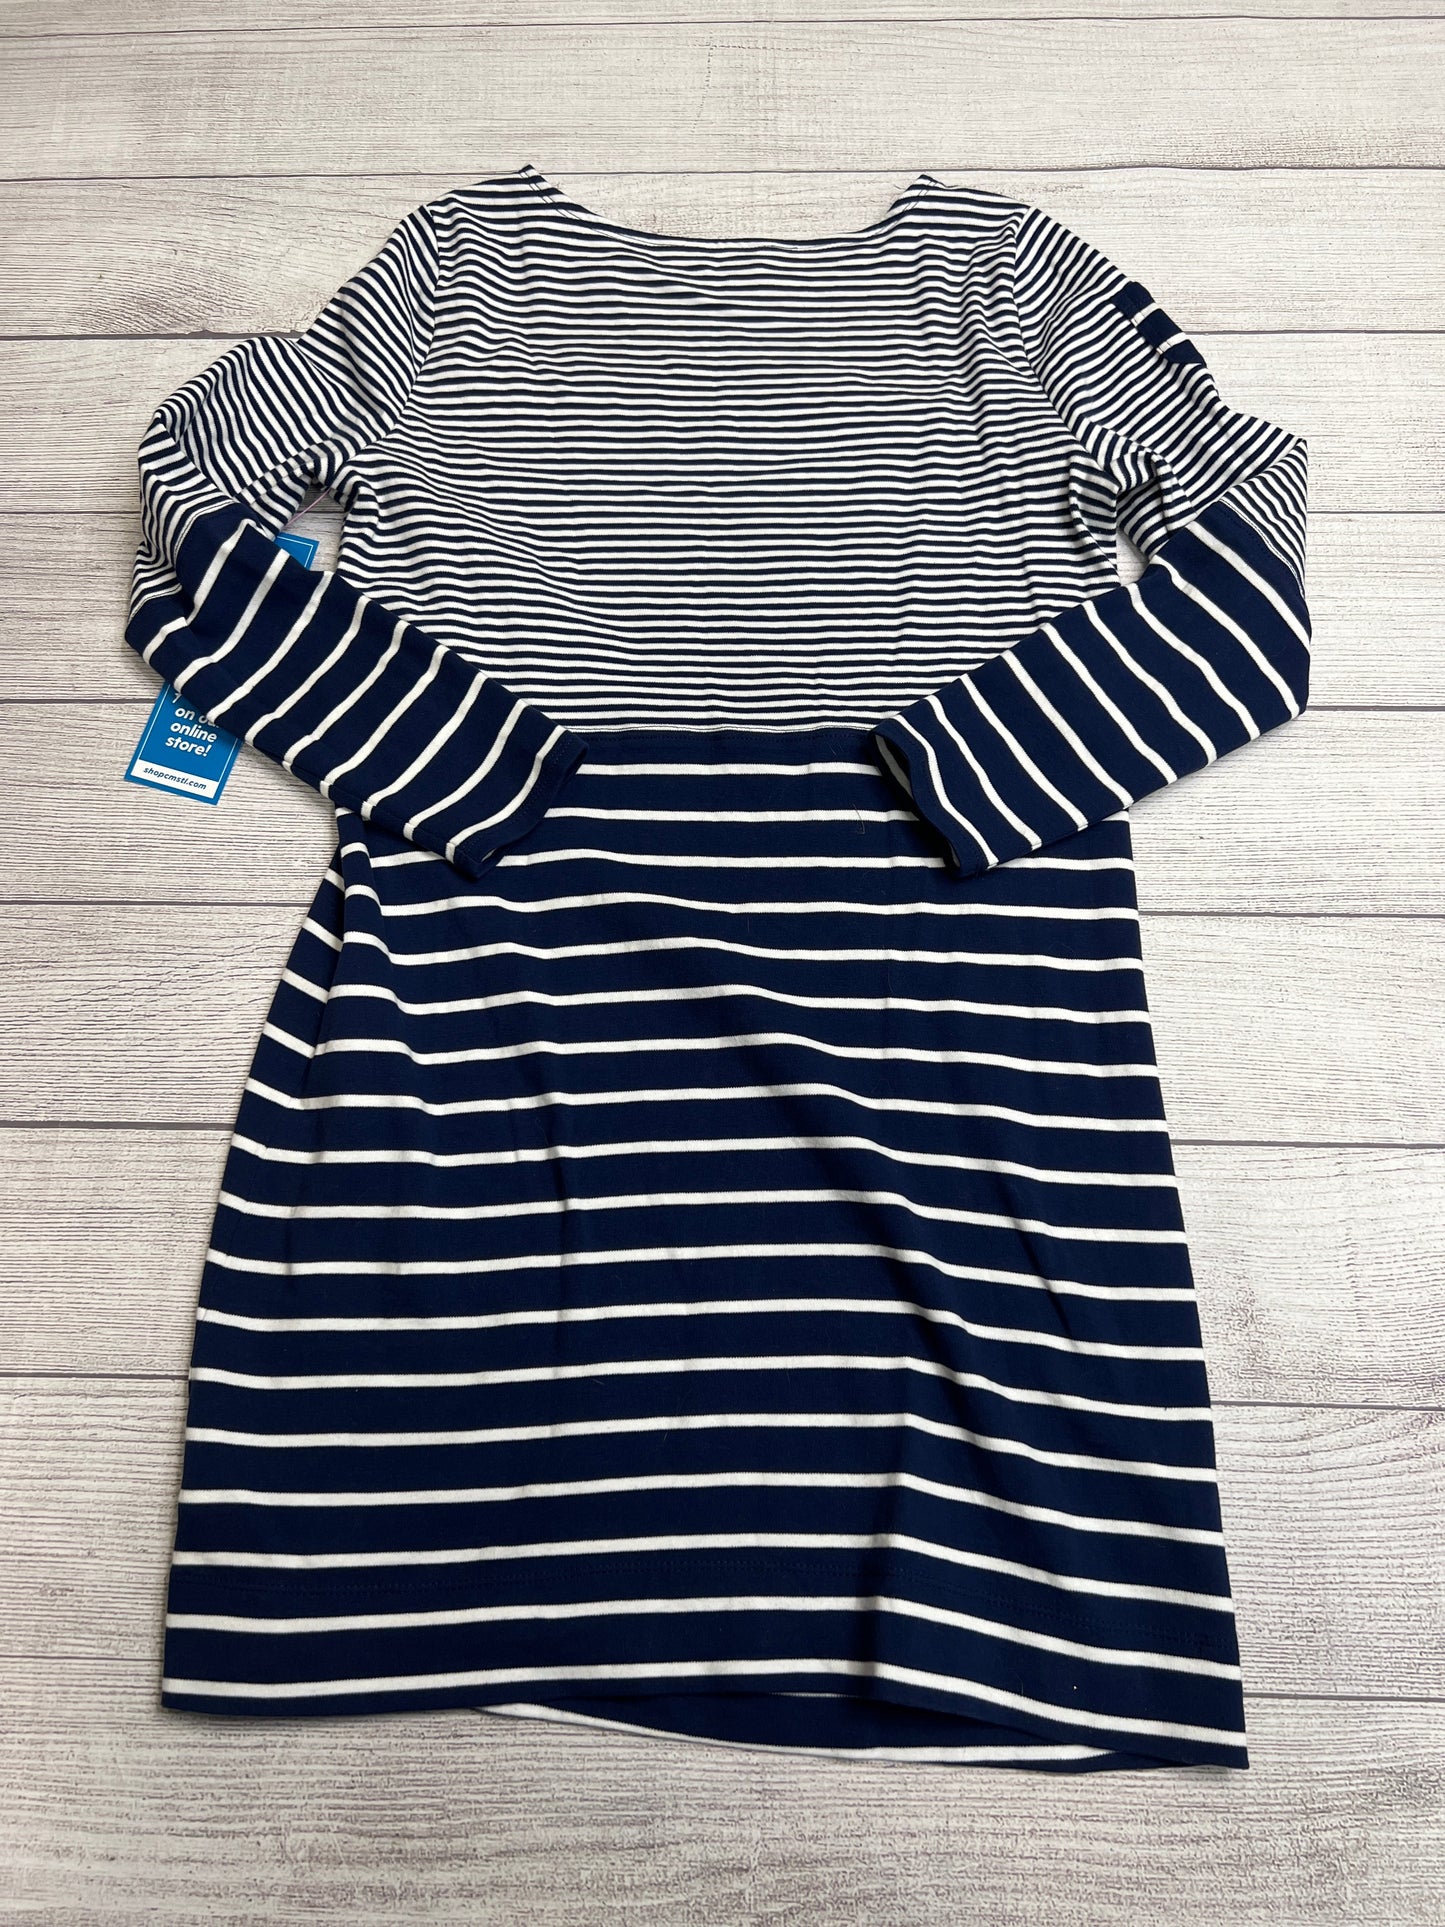 Dress Casual Short By Vineyard Vines  Size: S